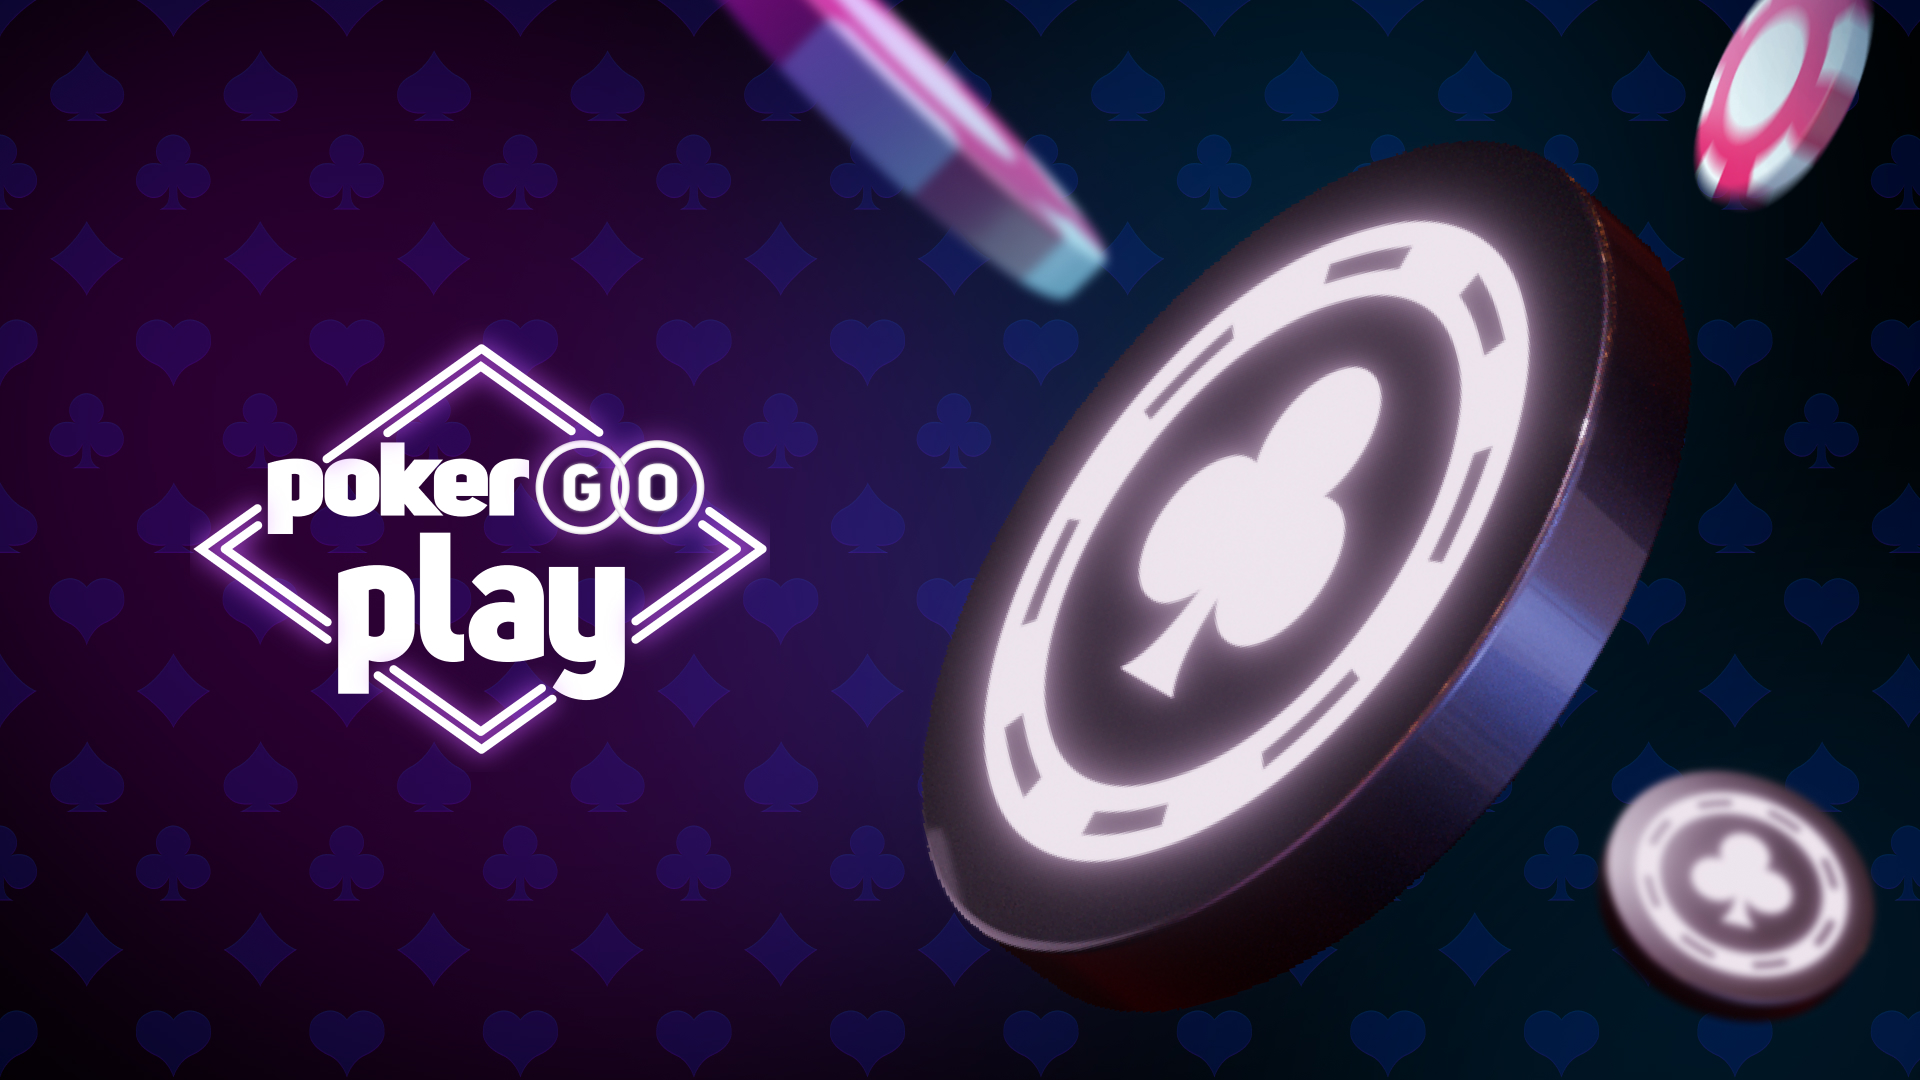 PokerGO Play is the casual web3 poker game from Gala Games that rewards players for playing, not just winning.